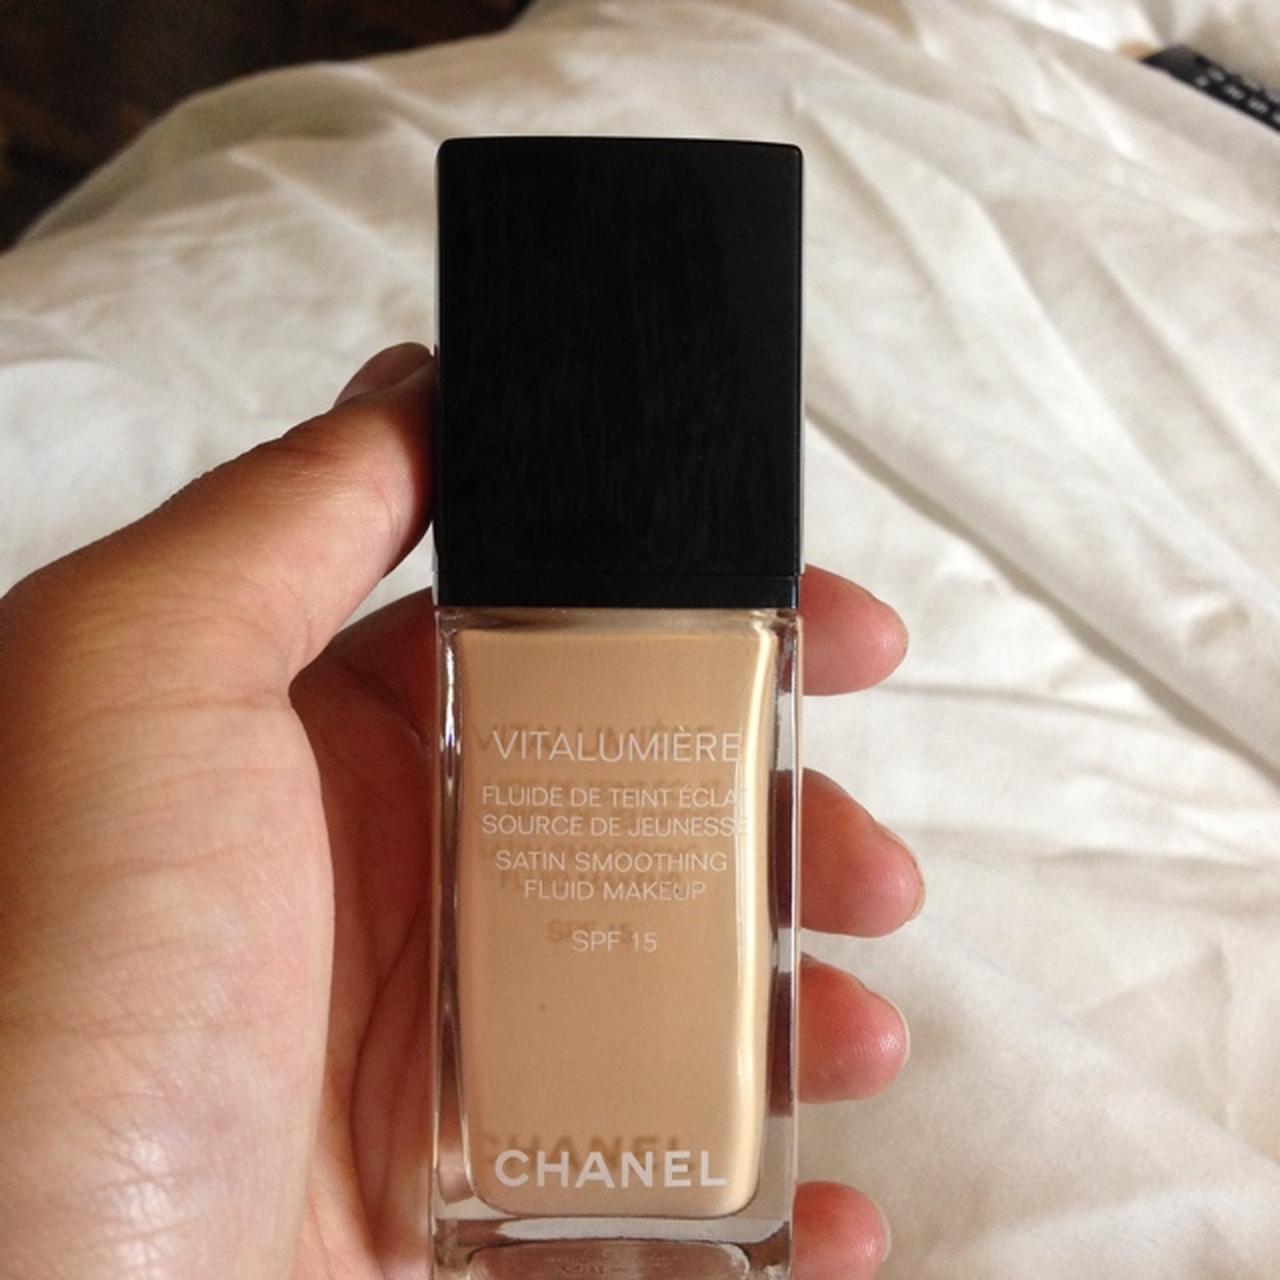 Chanel Lift Lumiere firming and smoothing foundation - Depop